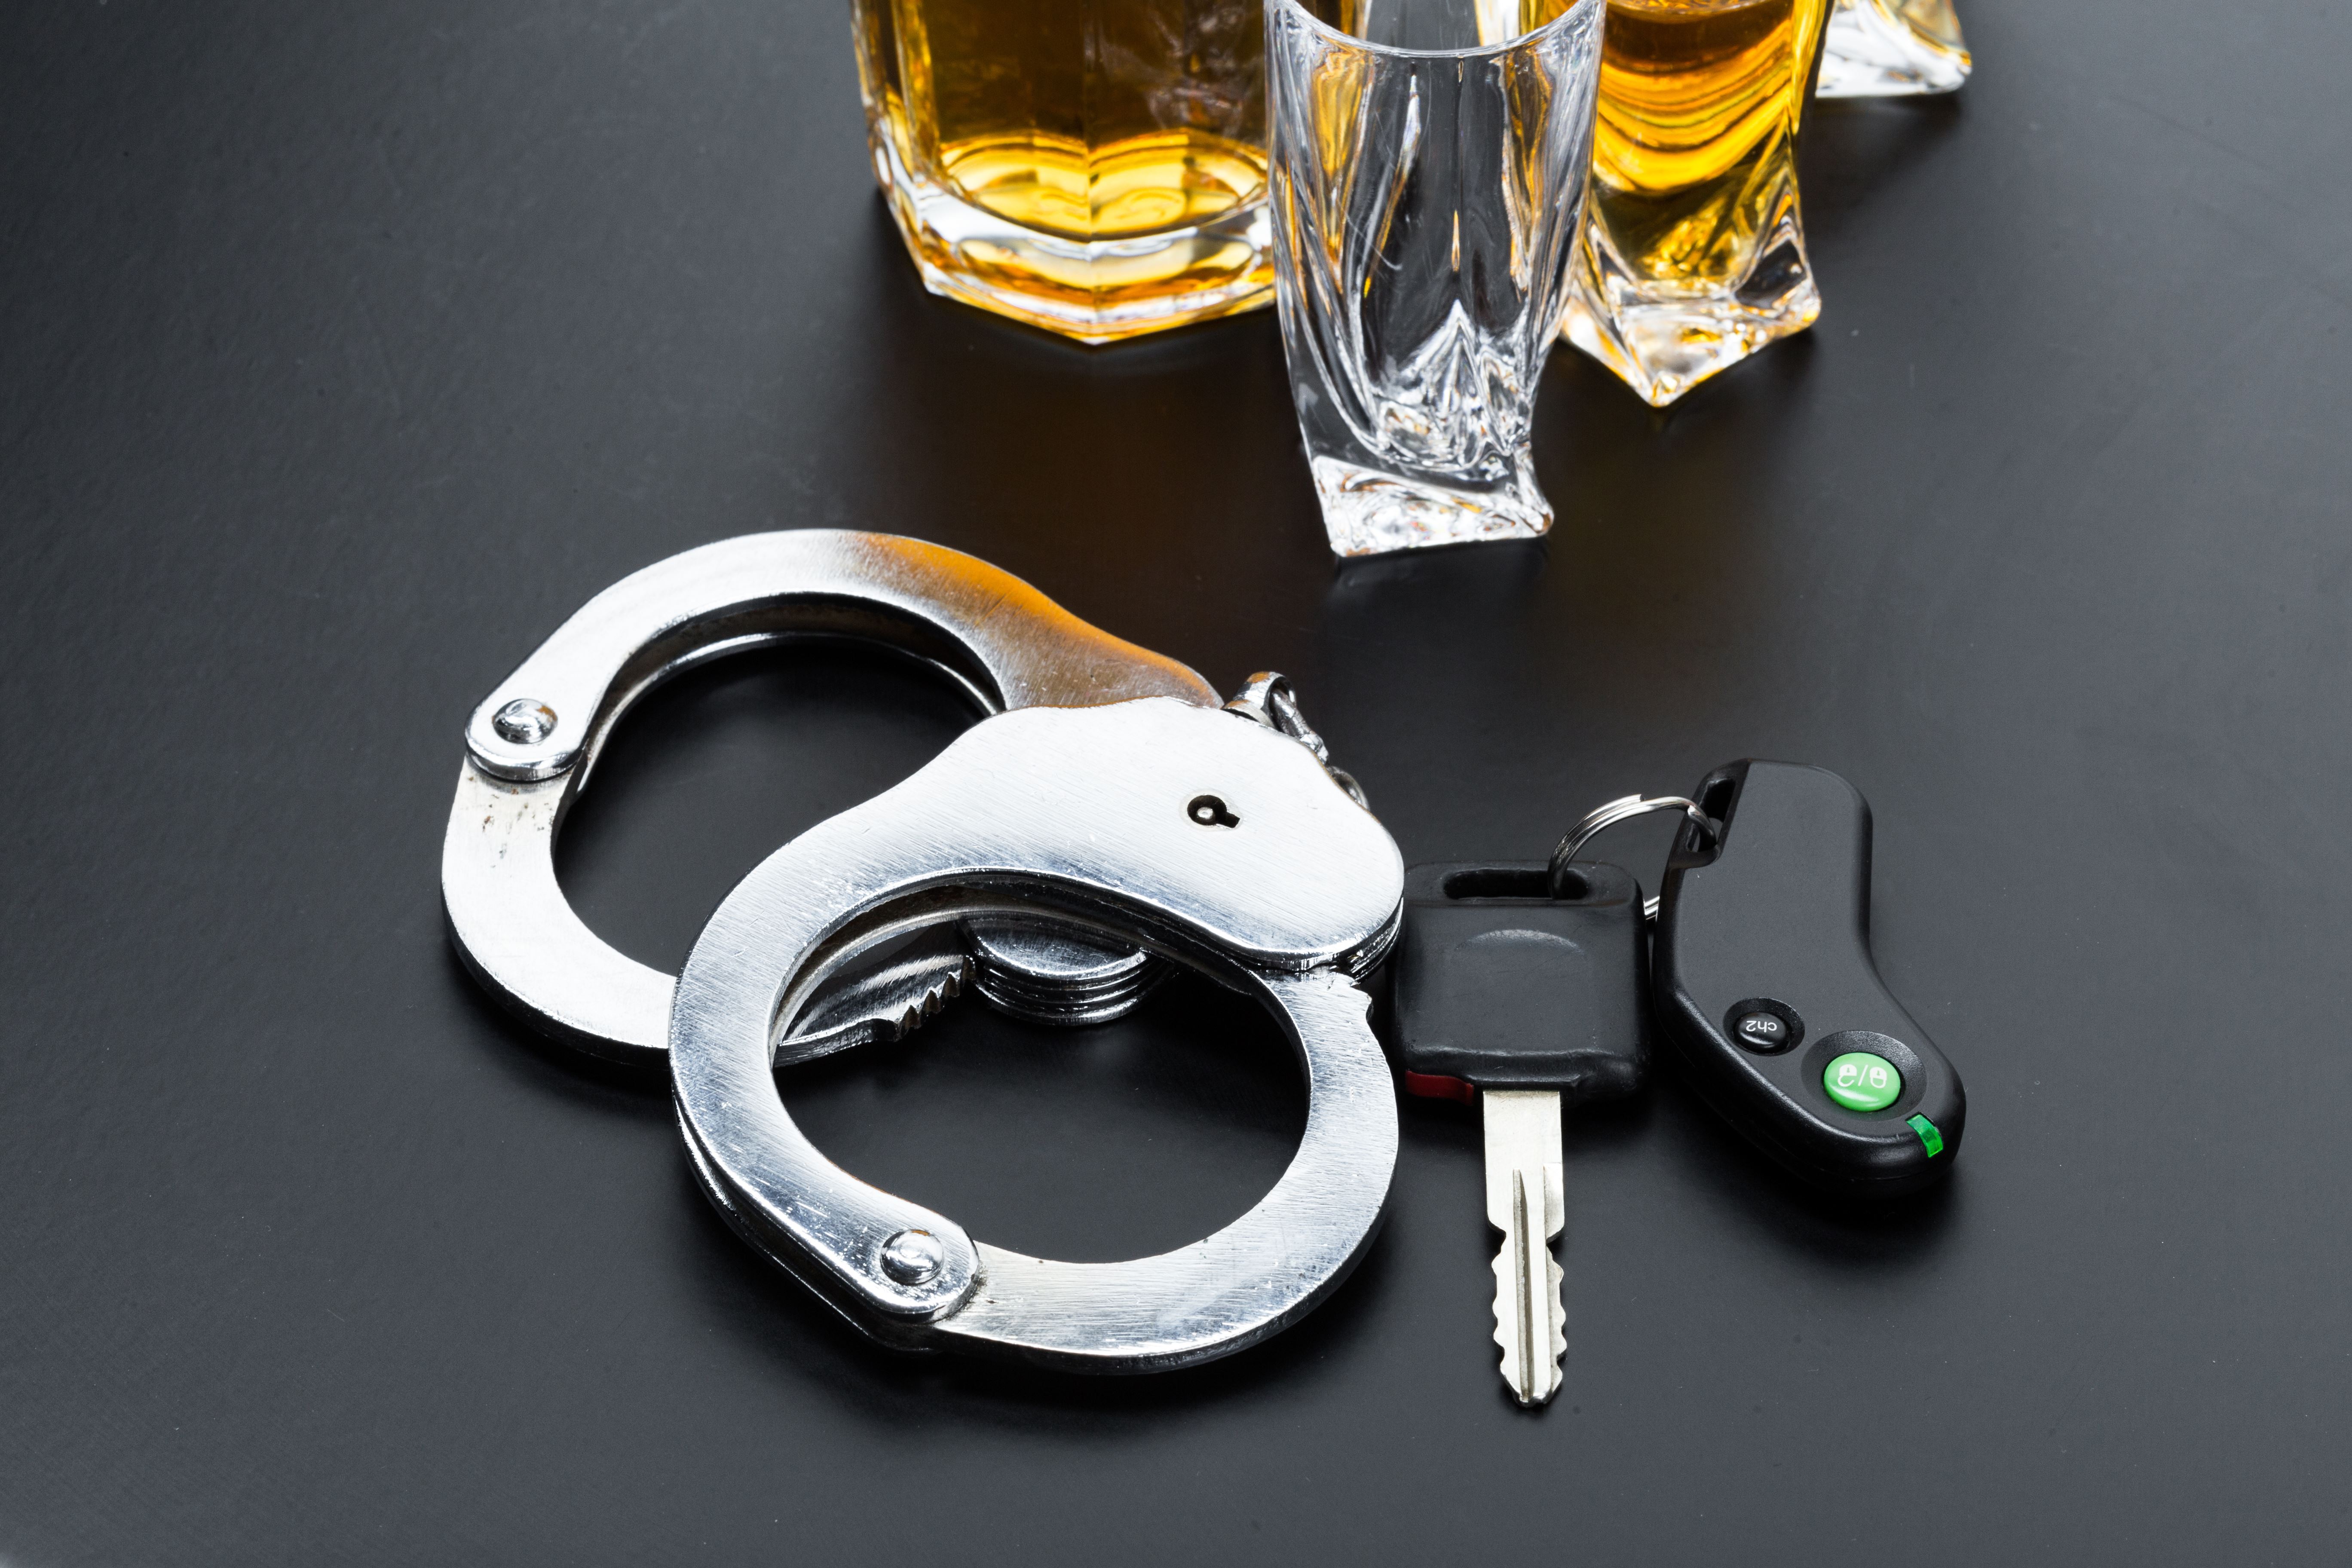 Alcohol, car keys and handcuffs - first offense DWI in Texas